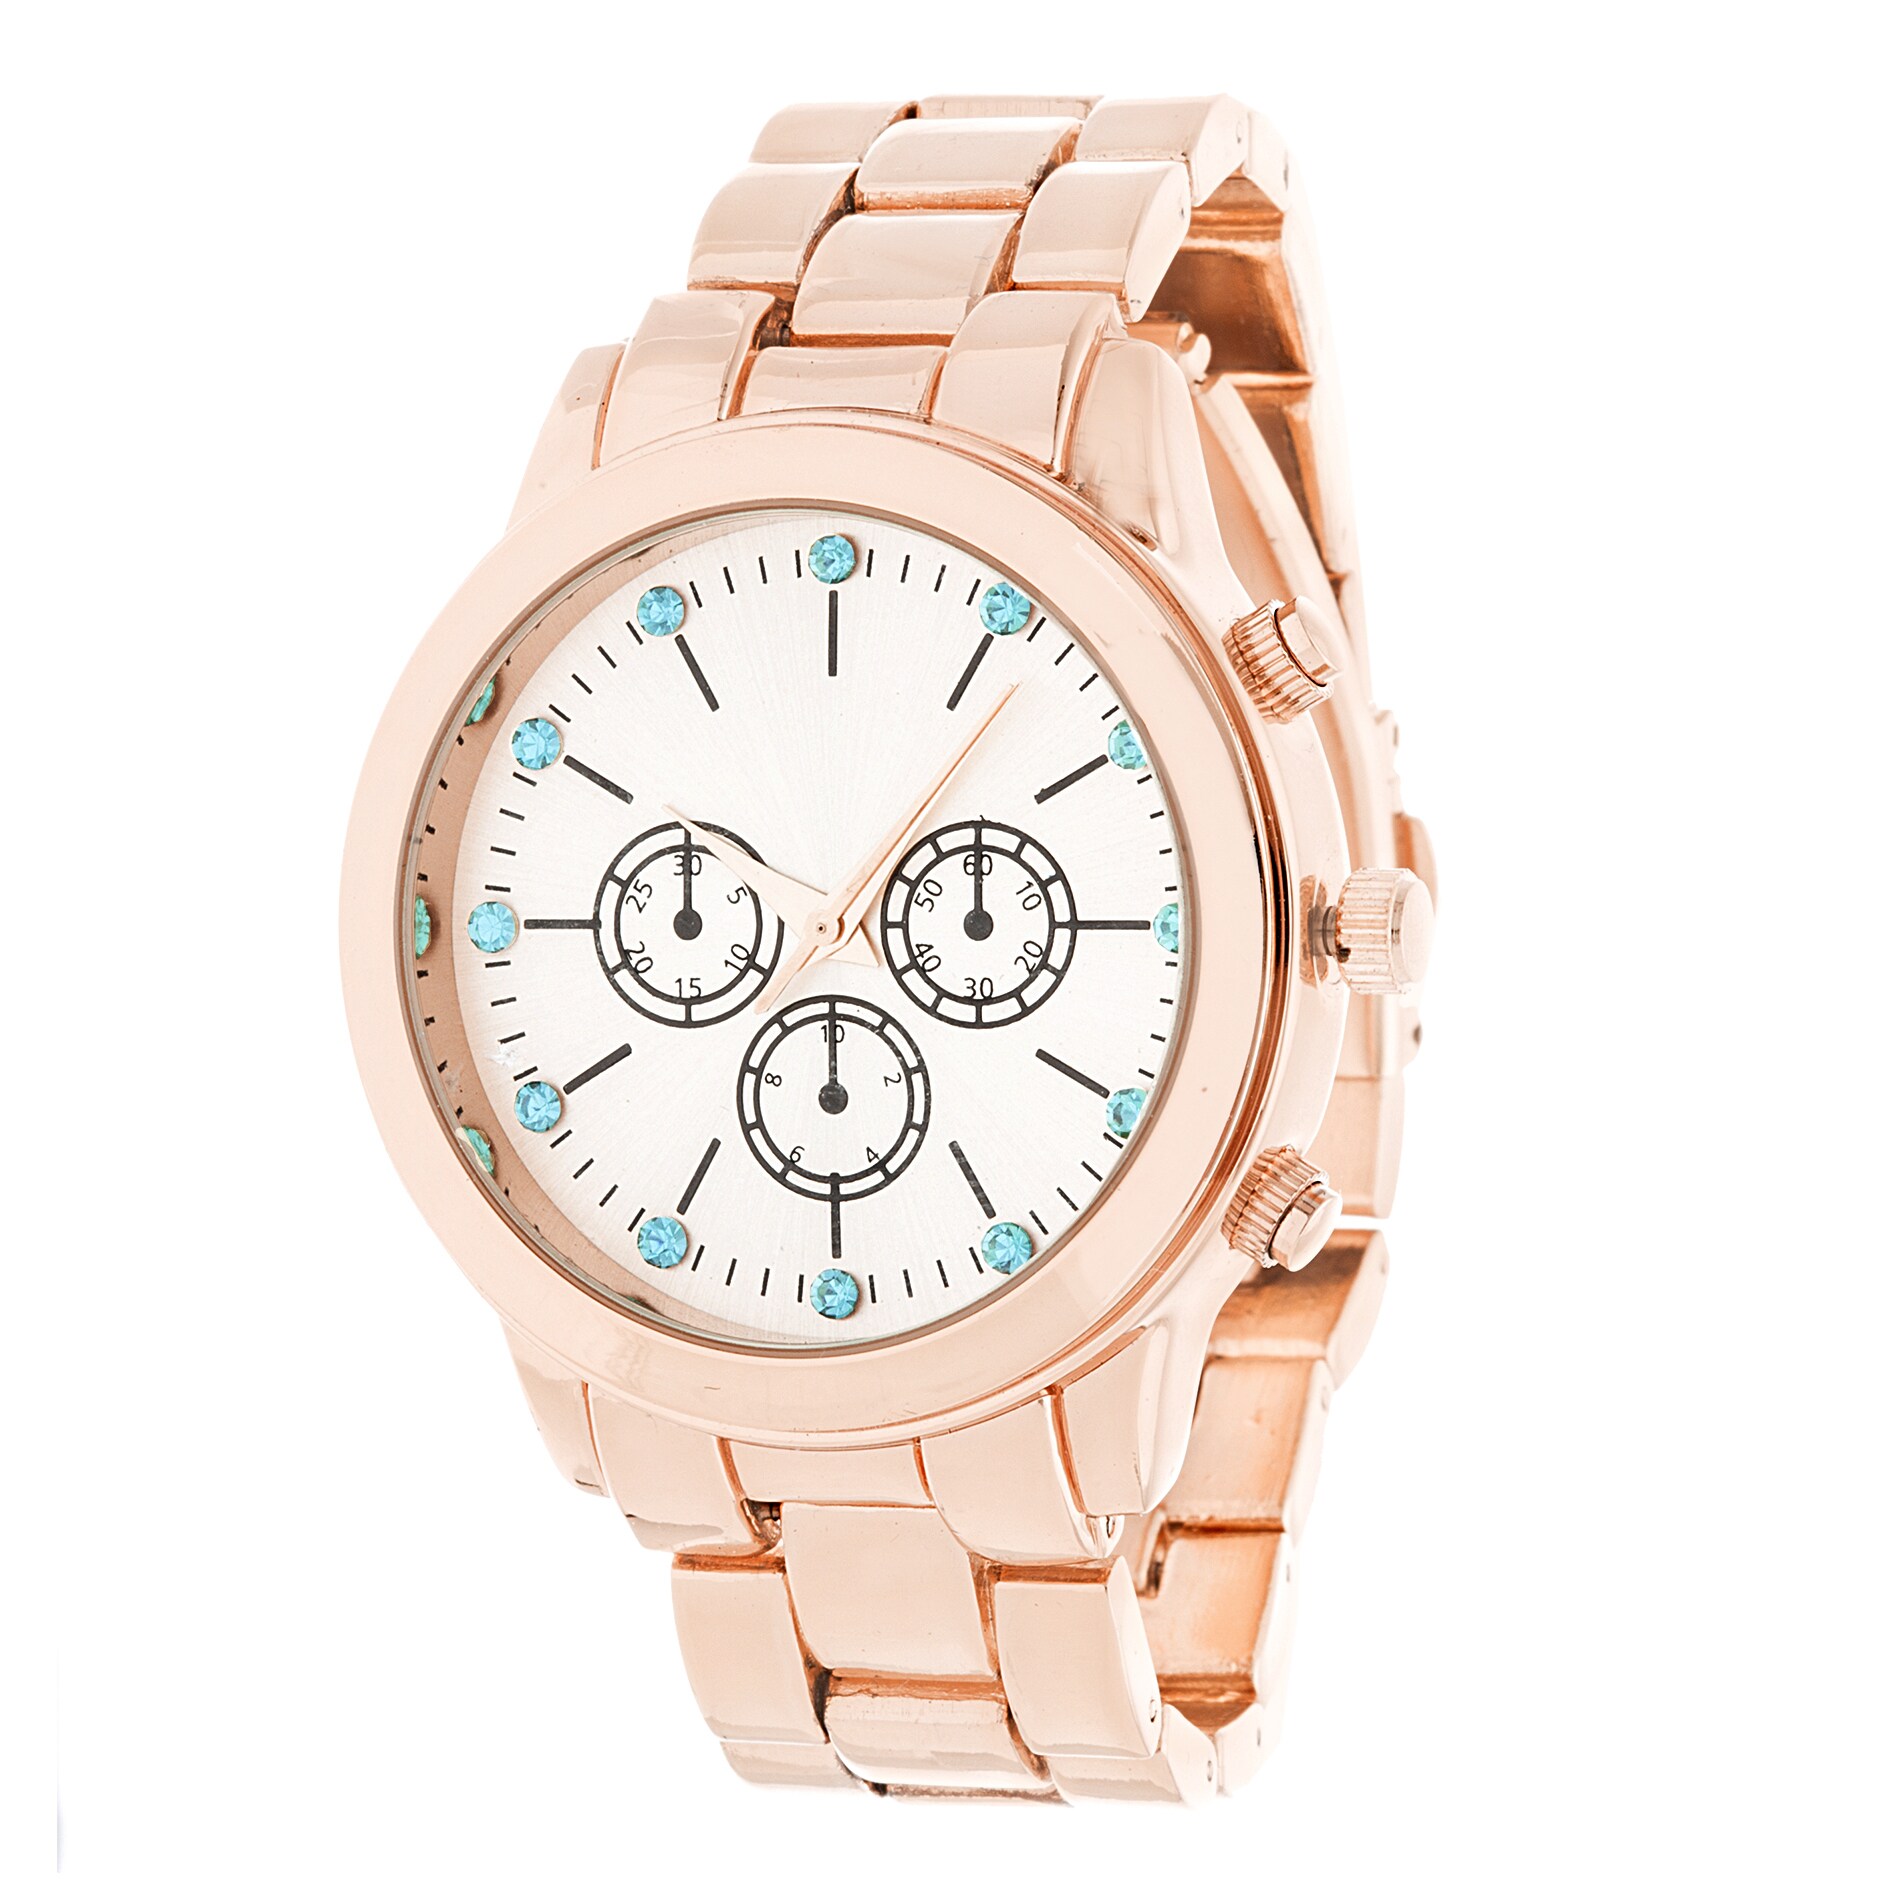 Fortune NYC Rose-Gold w/ Stainless Steel and Strap Watch - Overstock - 12660976